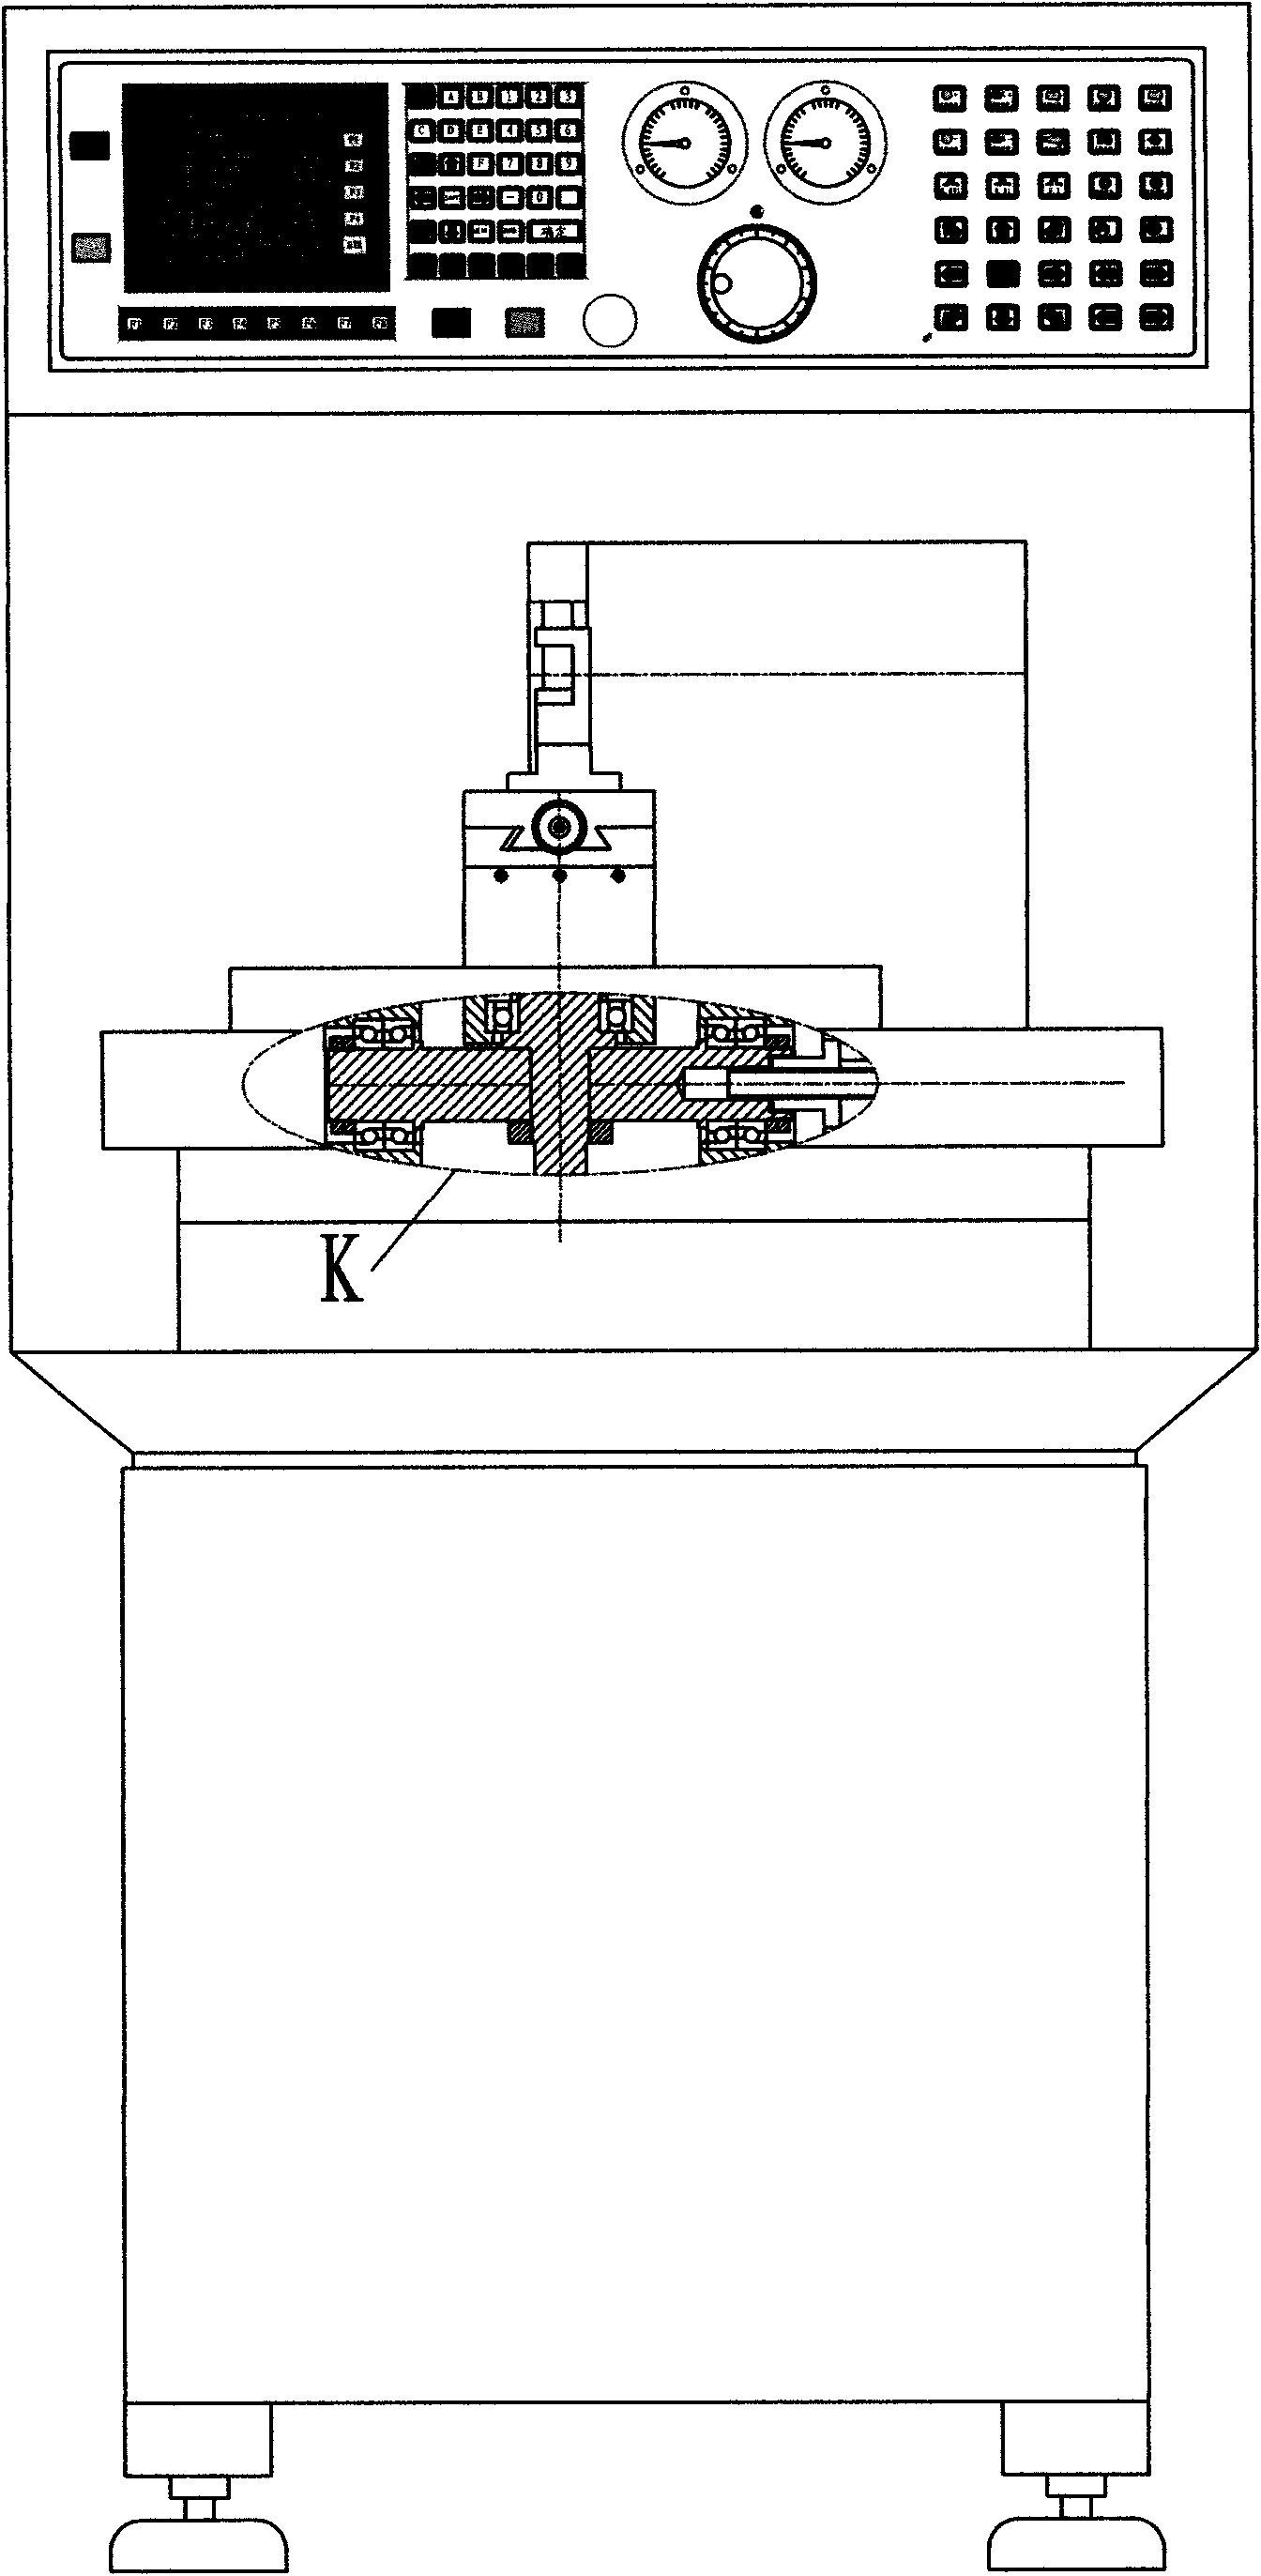 Arc blade milling machine for swing arm tool